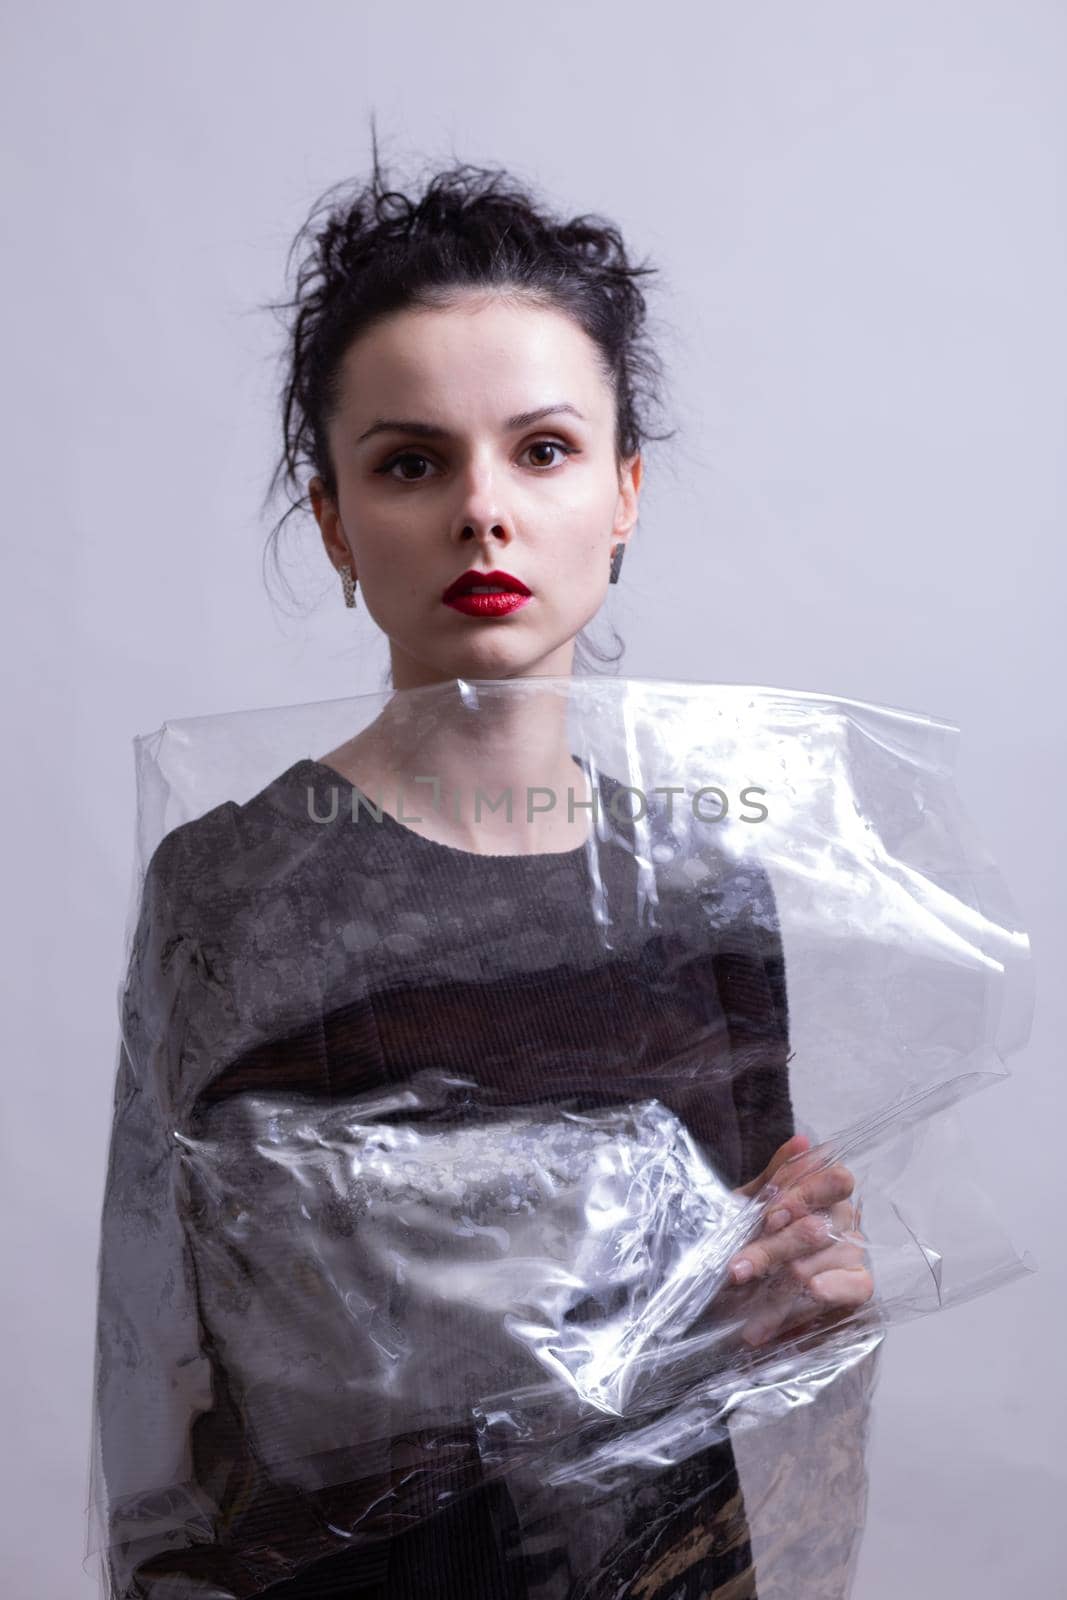 woman with red lips wrapped in plastic wrap by shilovskaya